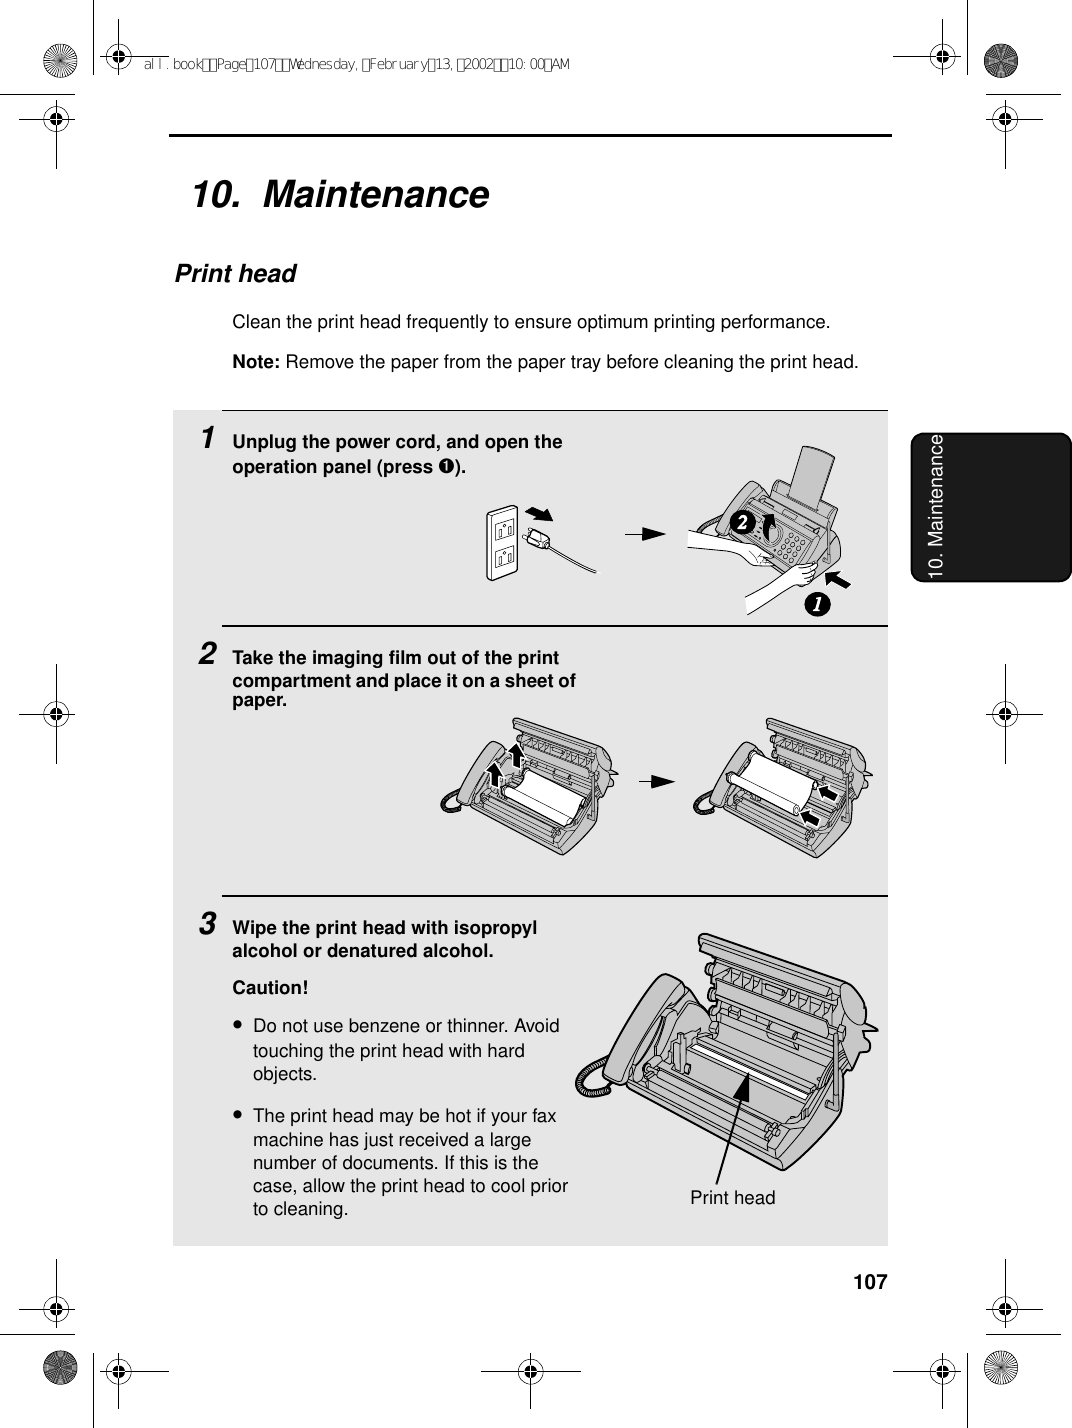 10710. Maintenance10.  MaintenancePrint headClean the print head frequently to ensure optimum printing performance.Note: Remove the paper from the paper tray before cleaning the print head.1Unplug the power cord, and open the operation panel (press ➊).2Take the imaging film out of the print compartment and place it on a sheet of paper.3Wipe the print head with isopropyl alcohol or denatured alcohol.Caution!•Do not use benzene or thinner. Avoid touching the print head with hard objects.•The print head may be hot if your fax machine has just received a large number of documents. If this is the case, allow the print head to cool prior to cleaning.12Print headall.bookPage107Wednesday,February13,200210:00AM